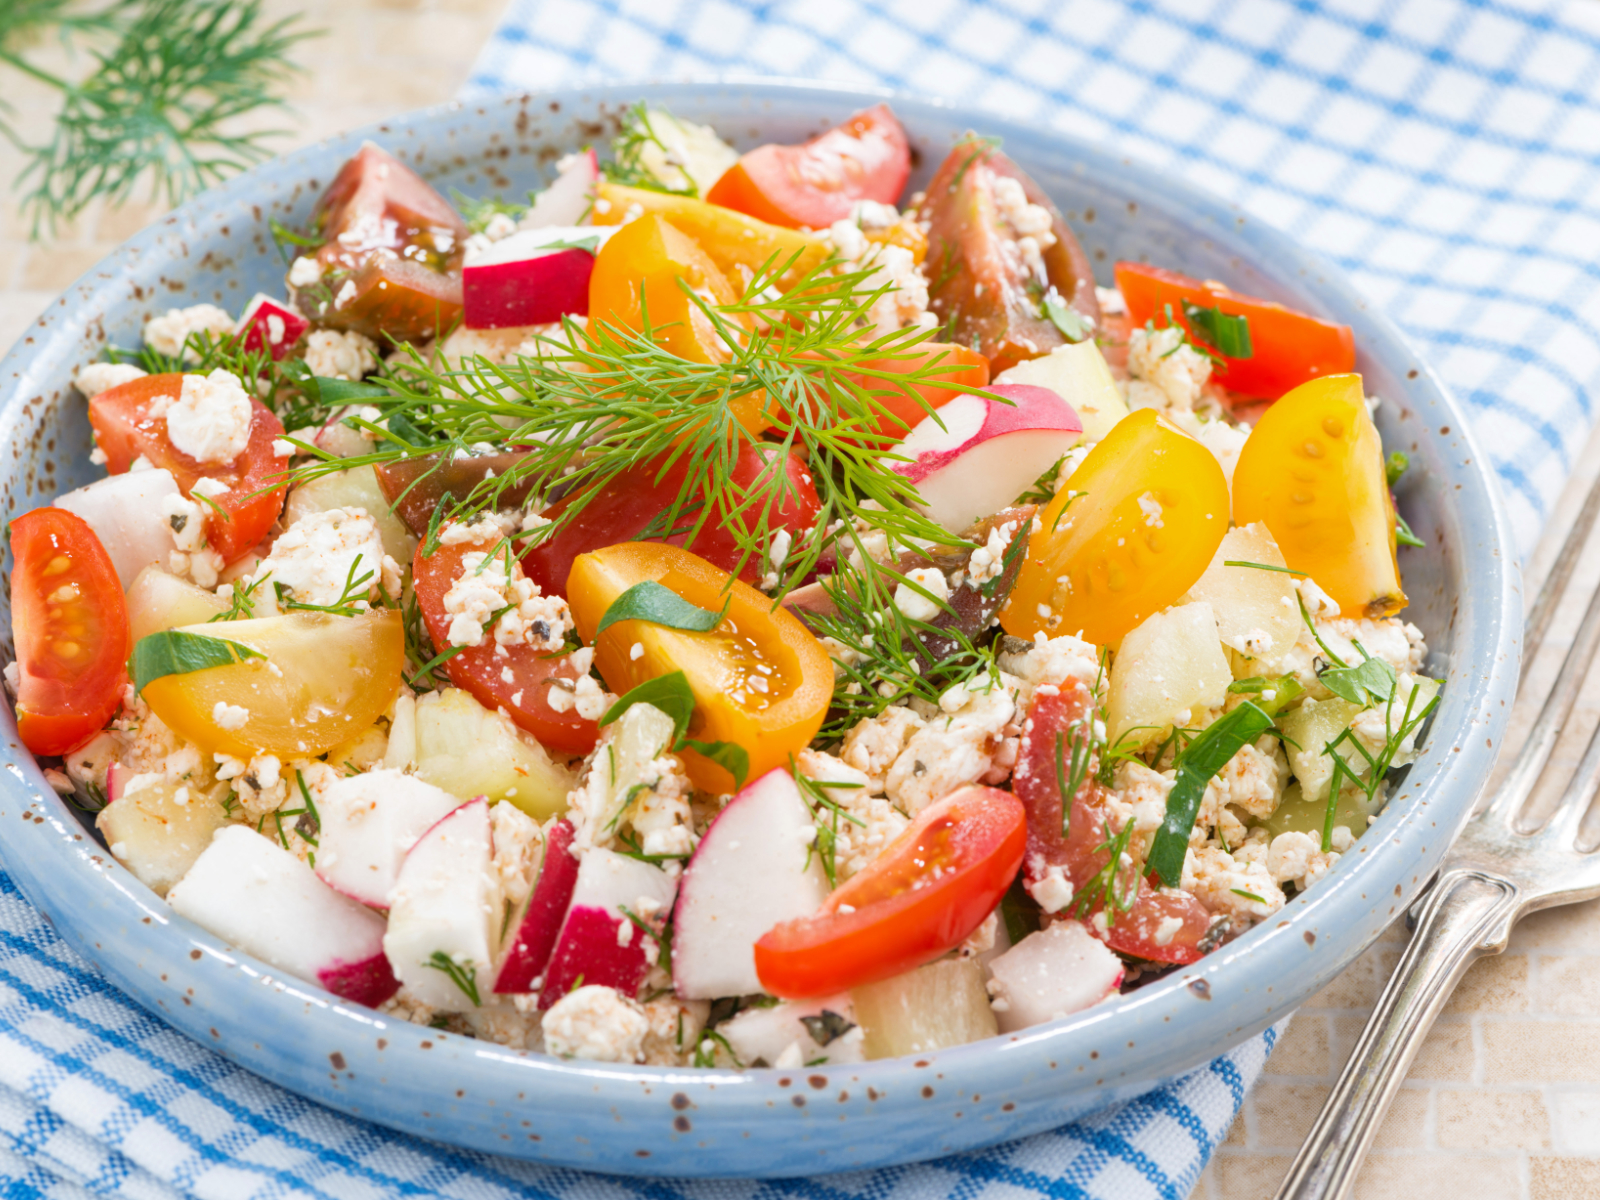 cottage cheese salad with cherry tomatoes, cucumbers, dressing, and fresh herbs